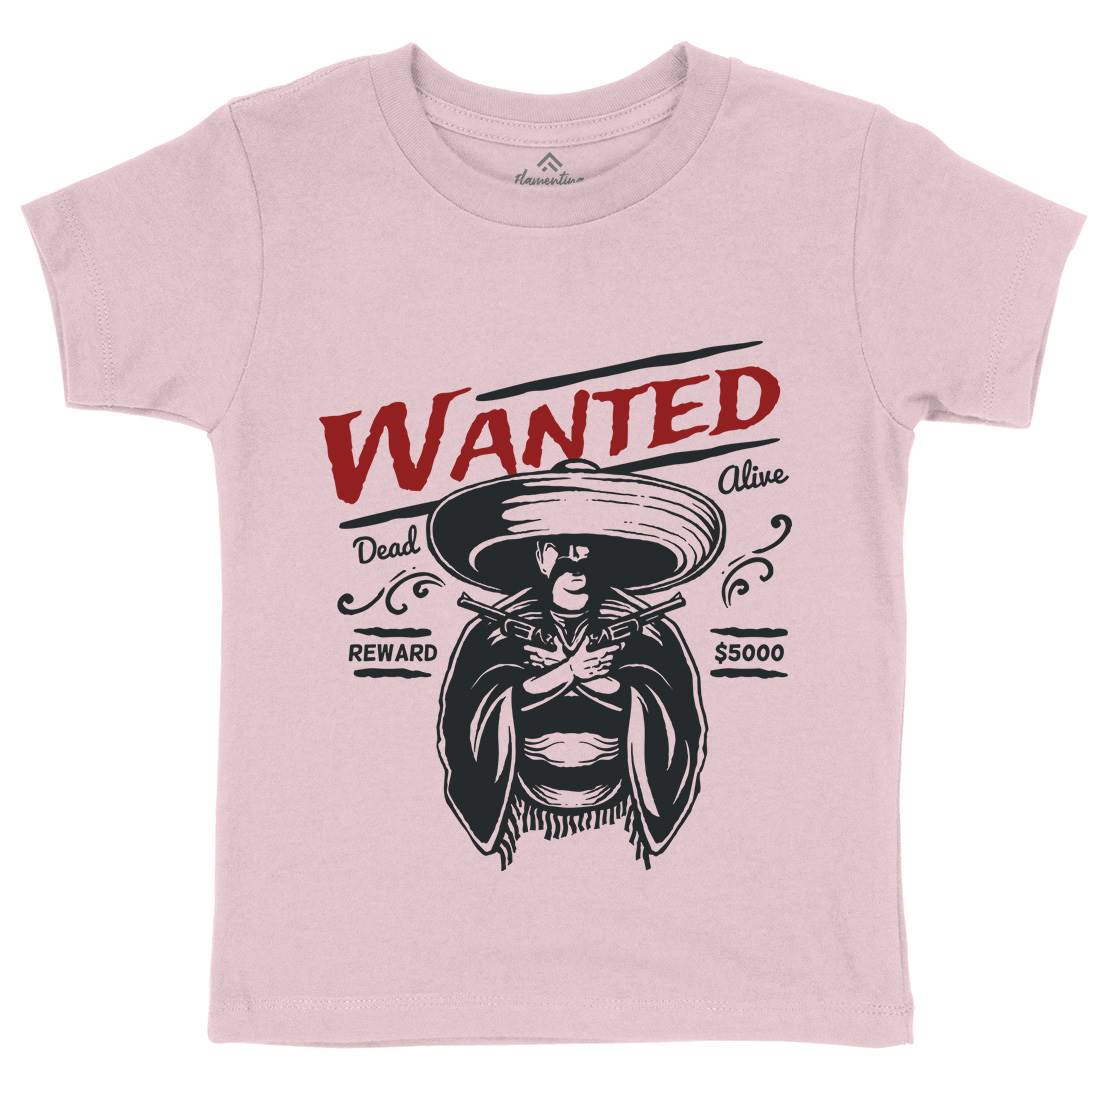 Wanted Kids Crew Neck T-Shirt American A391